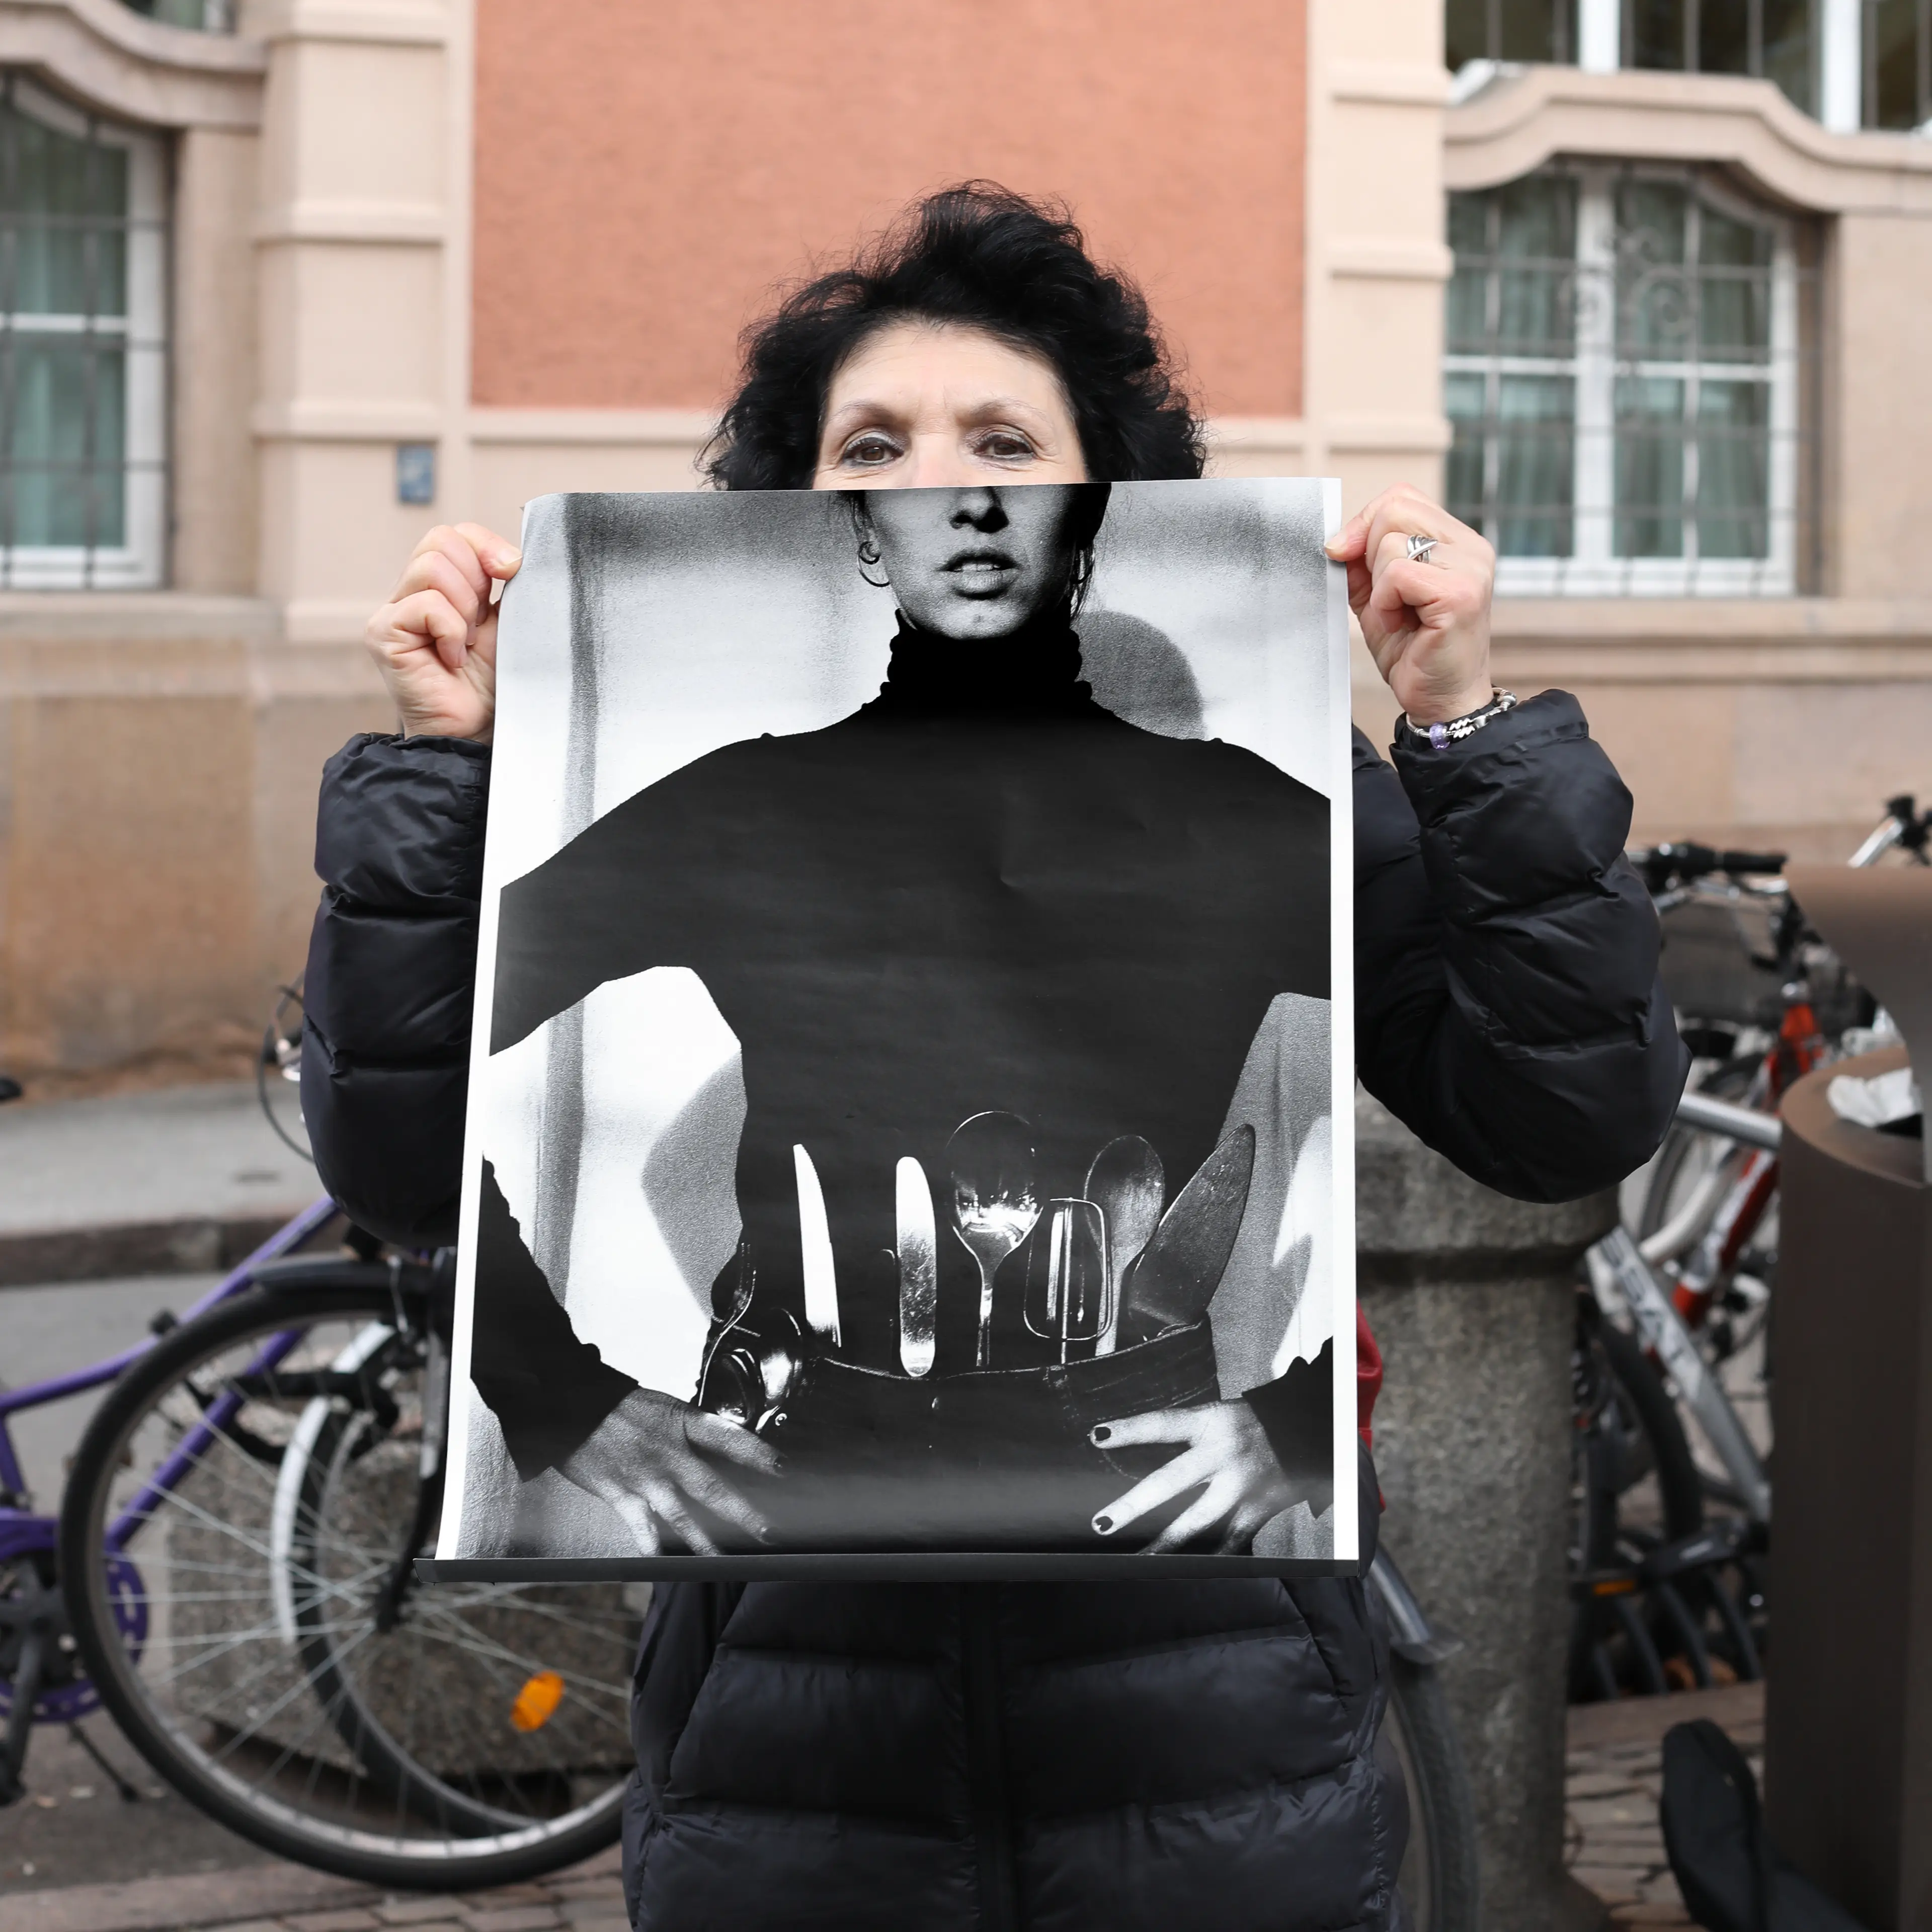 Image of person holding a poster